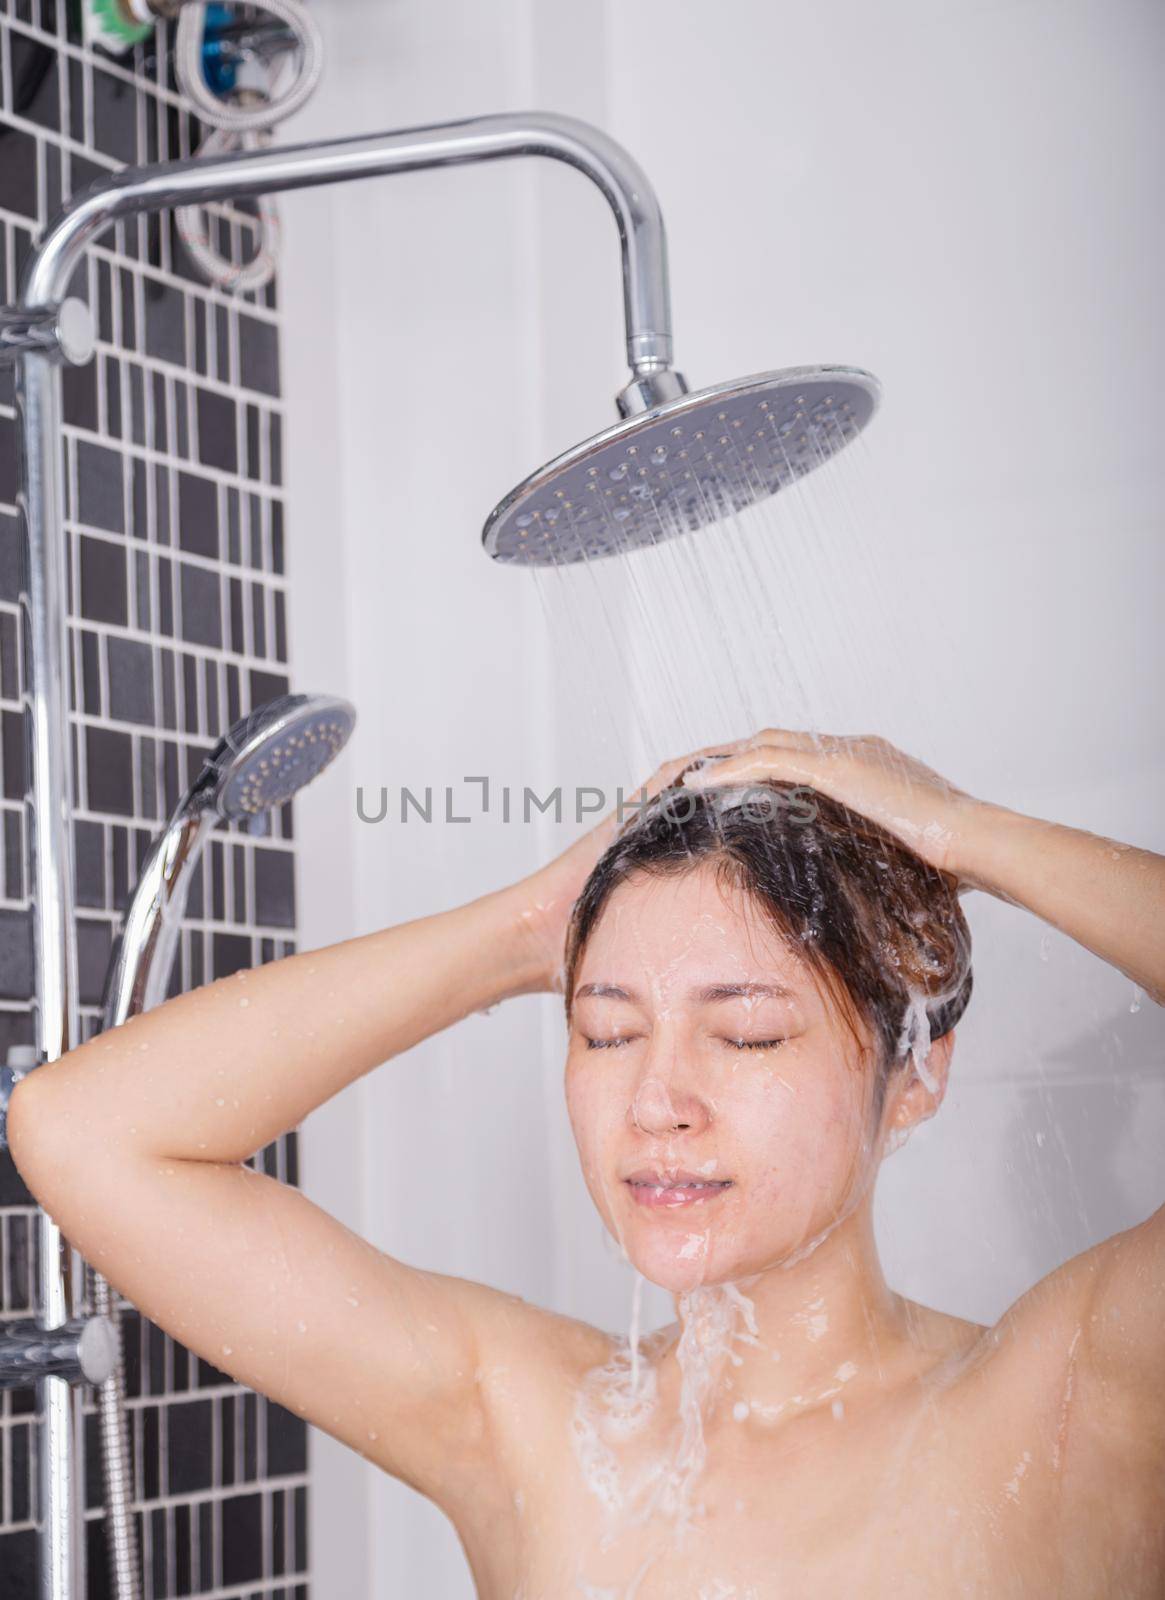 woman washing her head and hair in the rain shower by shampoo